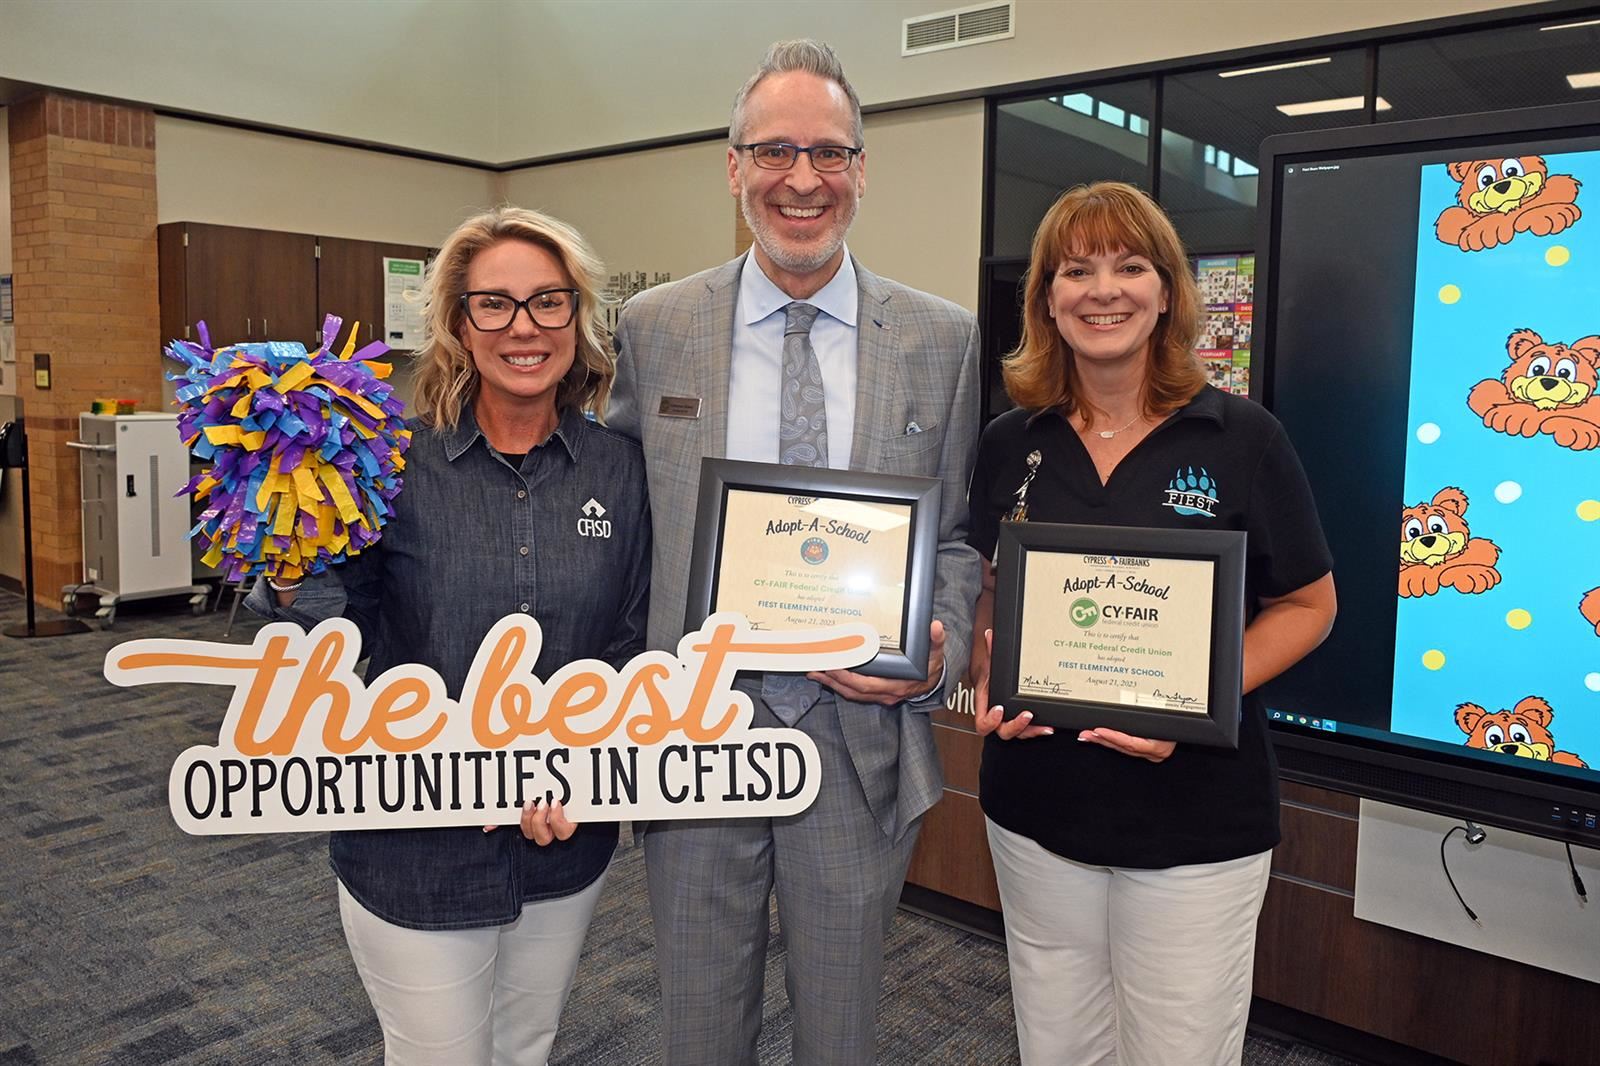 Dr. Jeanette Gerault, Fiest principal, and Cameron Dickey, Cy-Fair Federal Credit Union president, hold certificates.